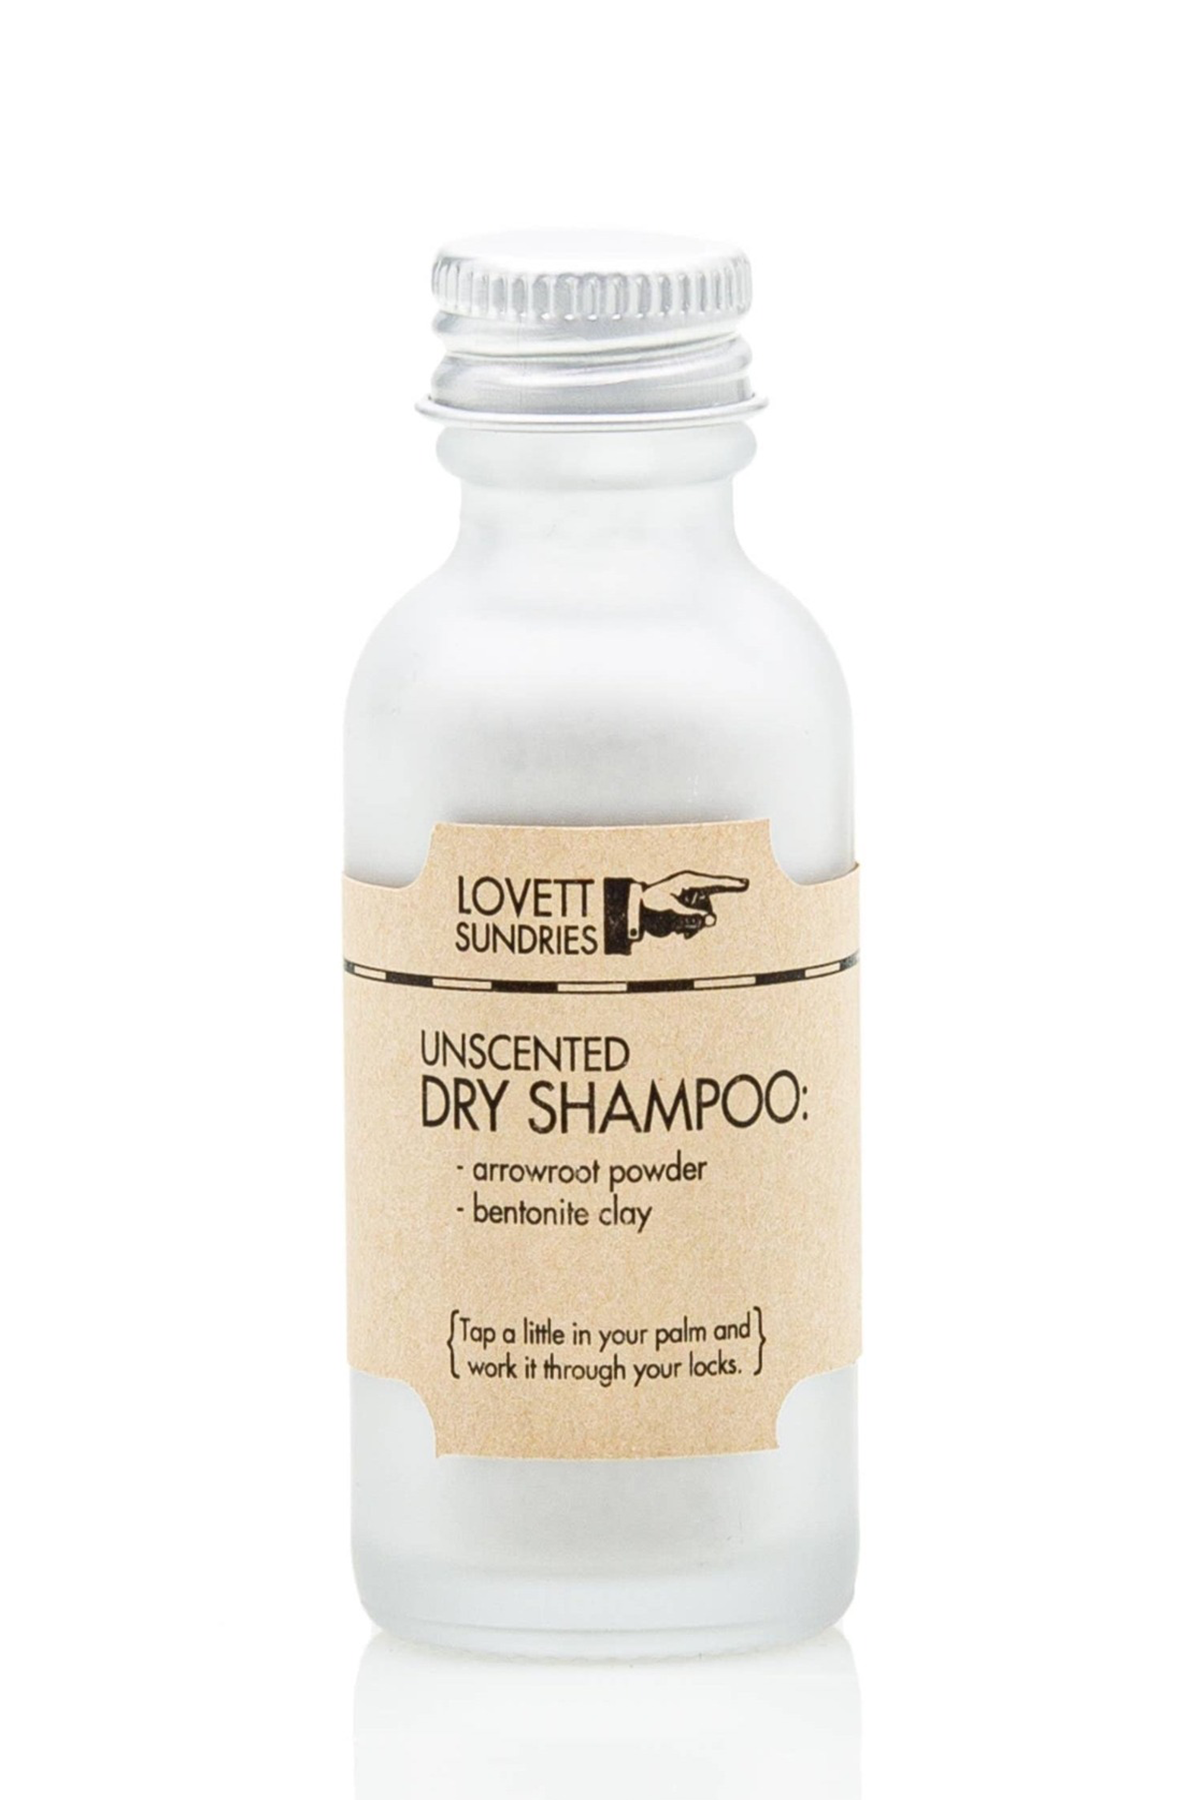 Women' Business Dry Shampoo - Unscented NORA GARDNER | OFFICIAL STORE for work and office